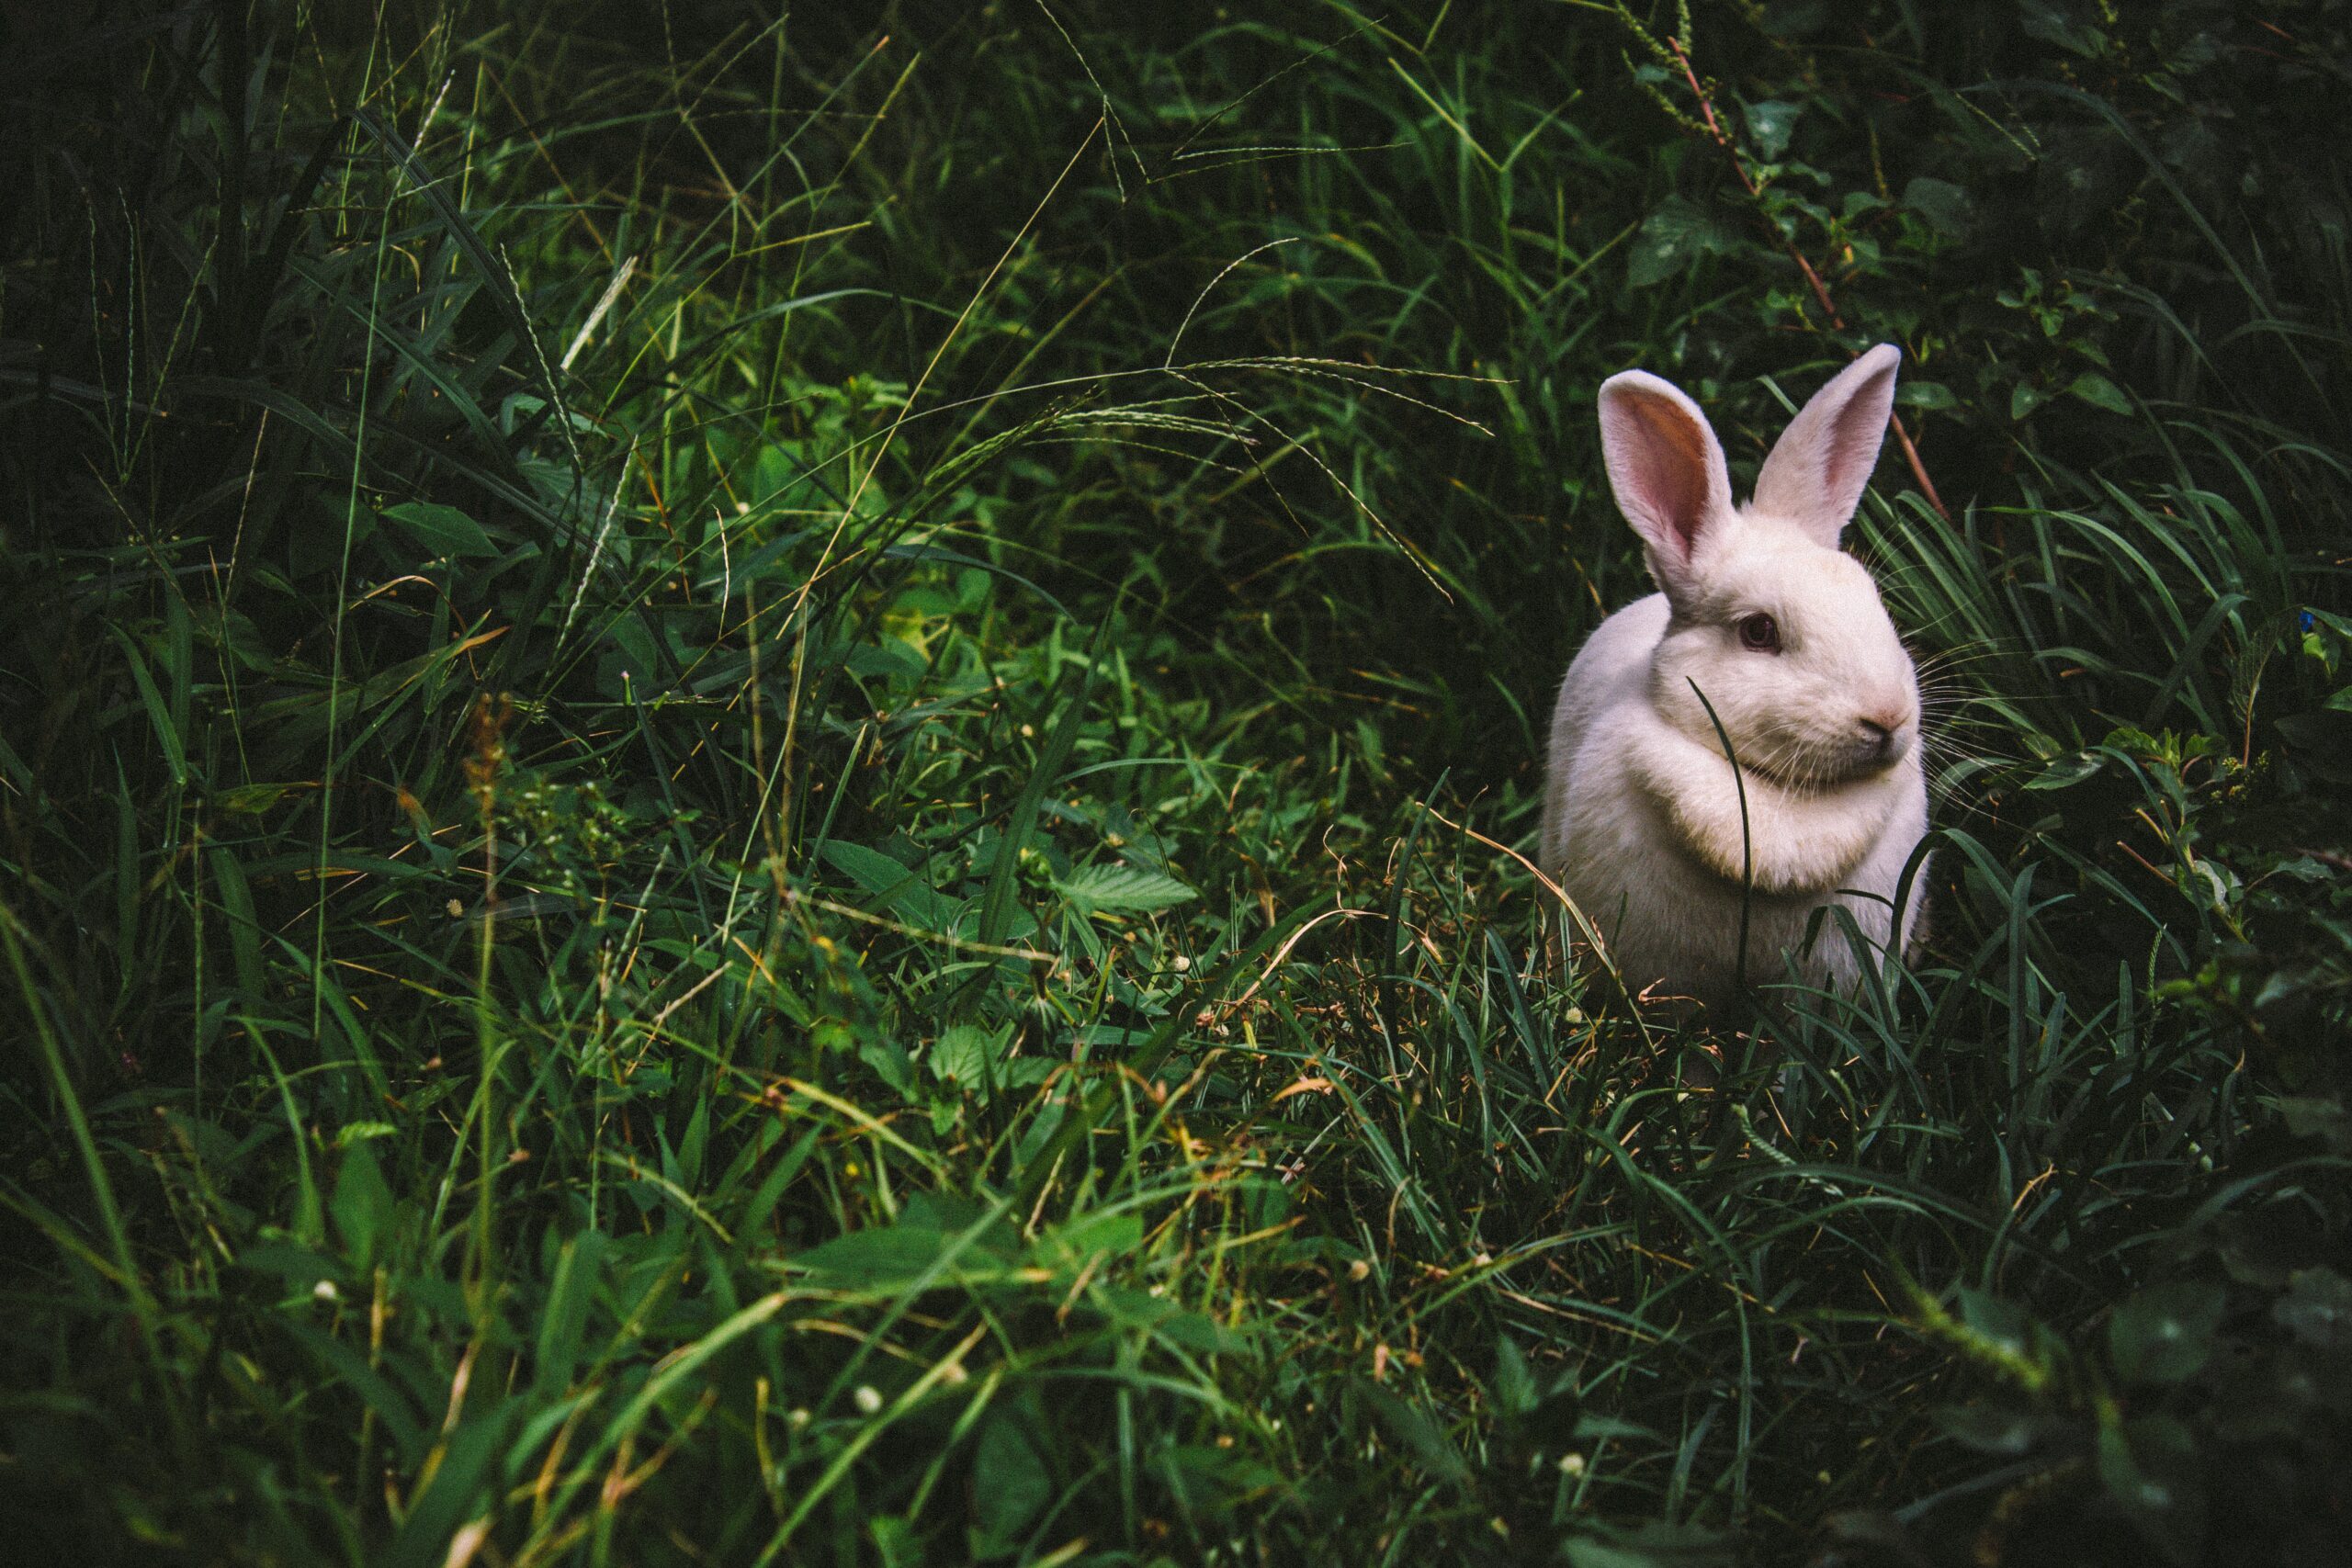 Sorry, but New Zealand really needs to kill these adorable rabbits